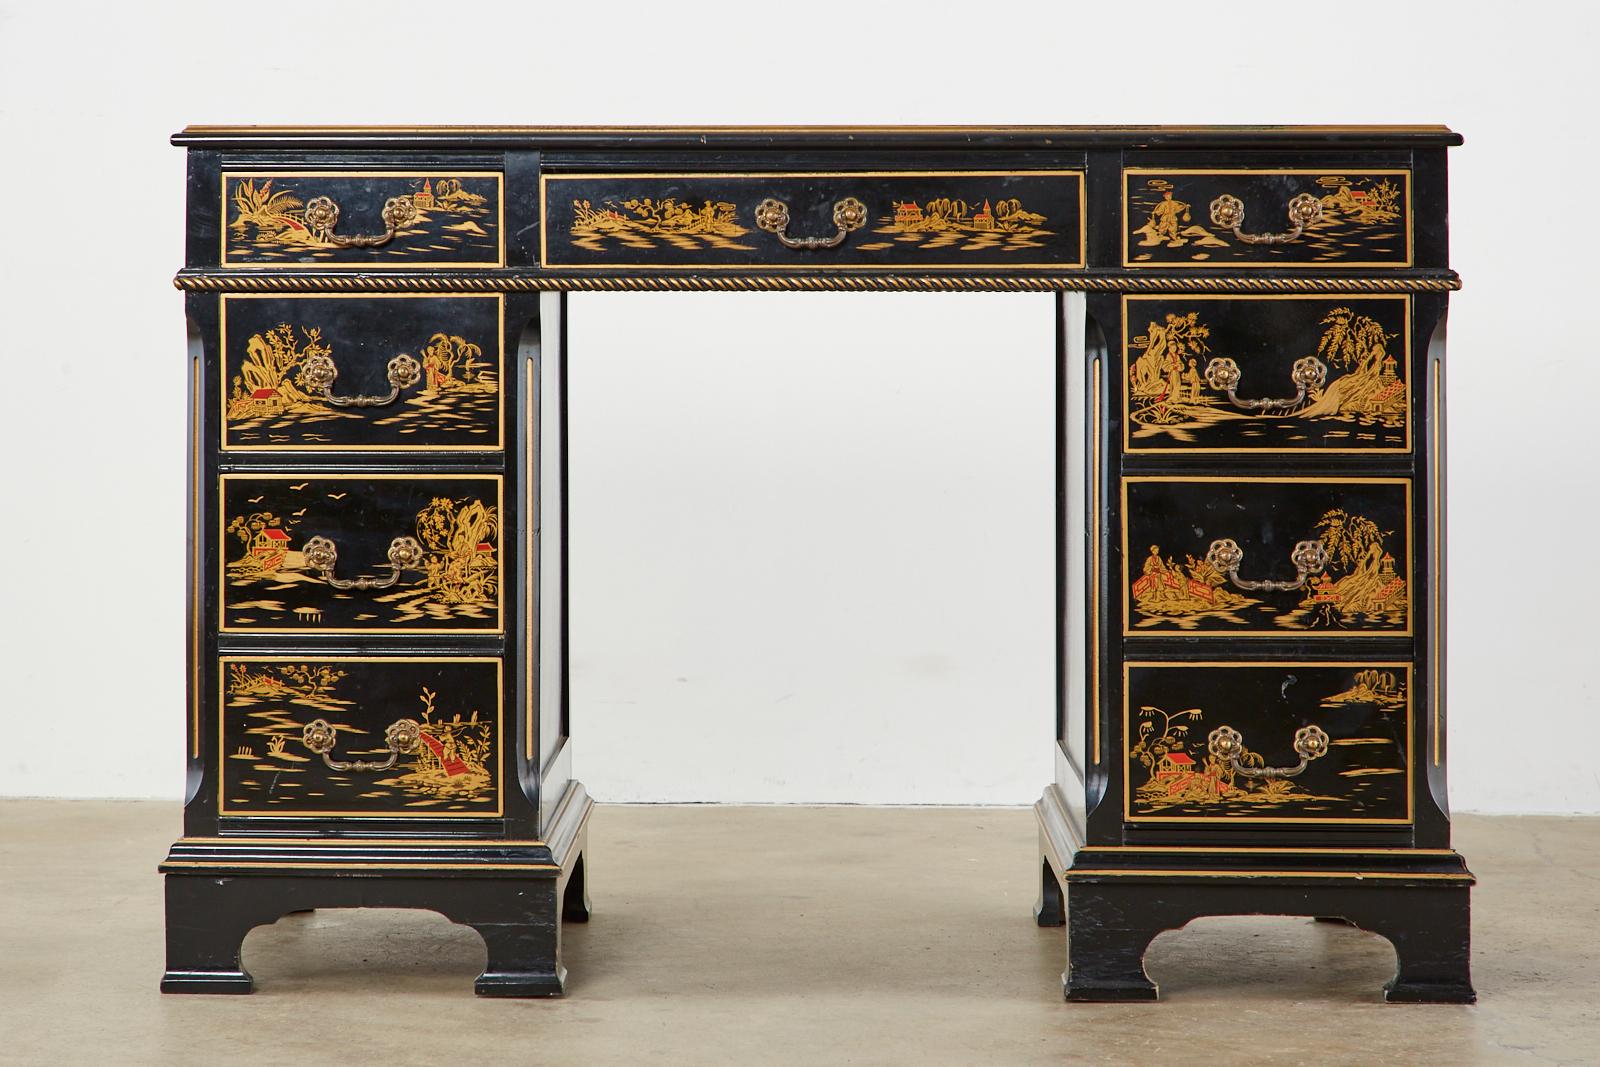 Distinctive English Regency style knee hole desk or writing table featuring a Japanned case decorated with chinoiserie painted scenes. The desk has a pedestal design with a leather top writing surface. The case has a decorative rope trim around the